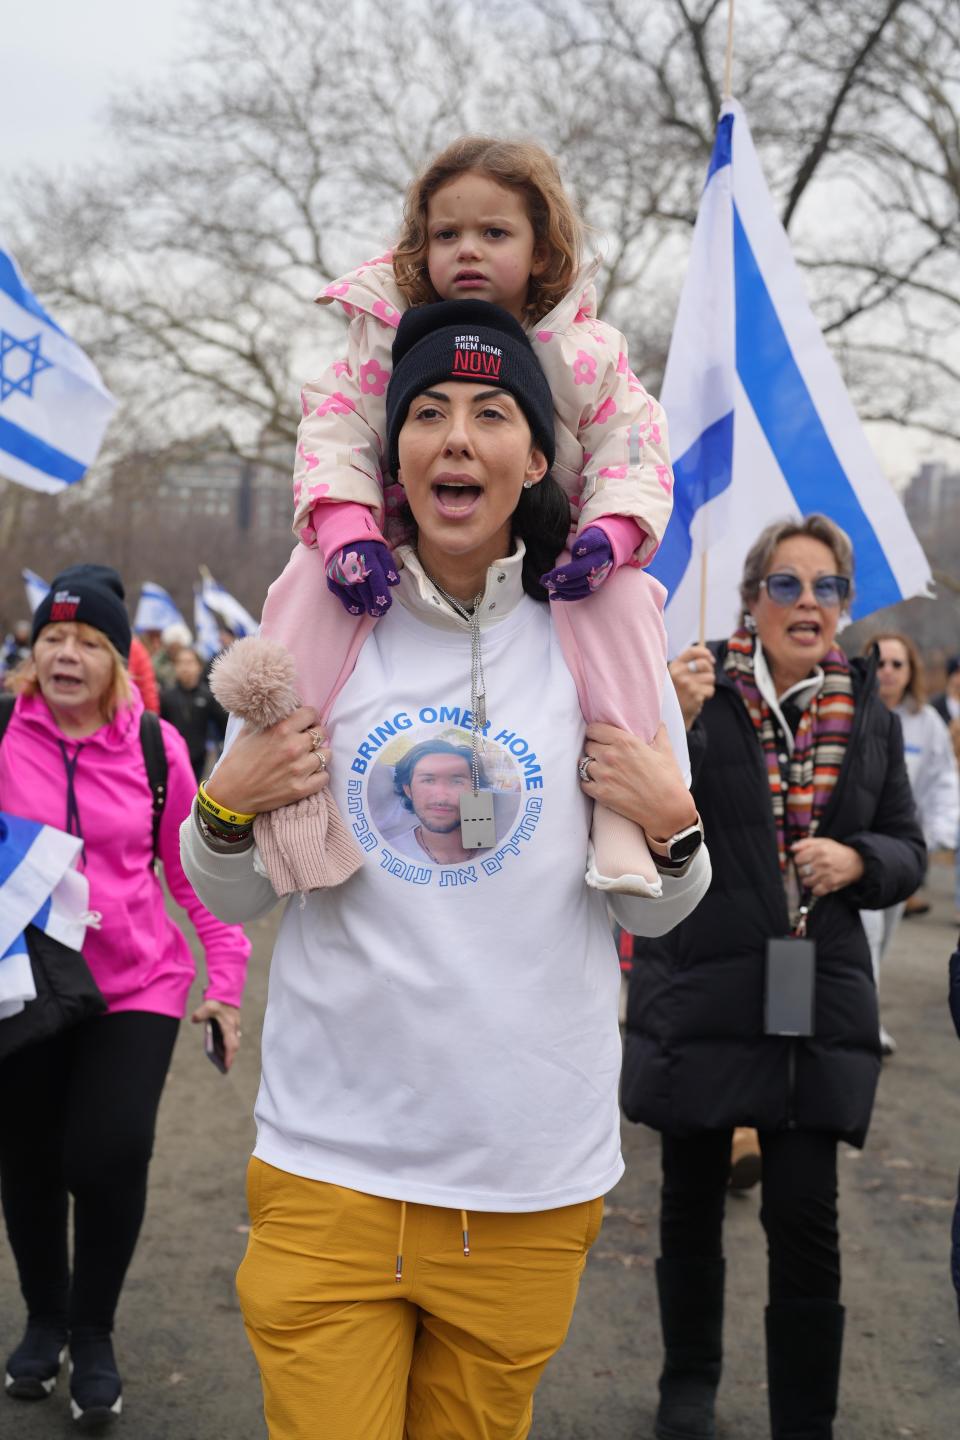 Leat Corrine Unger and her daughter march in a rally for the return of hostages held by Hamas in Gaza.